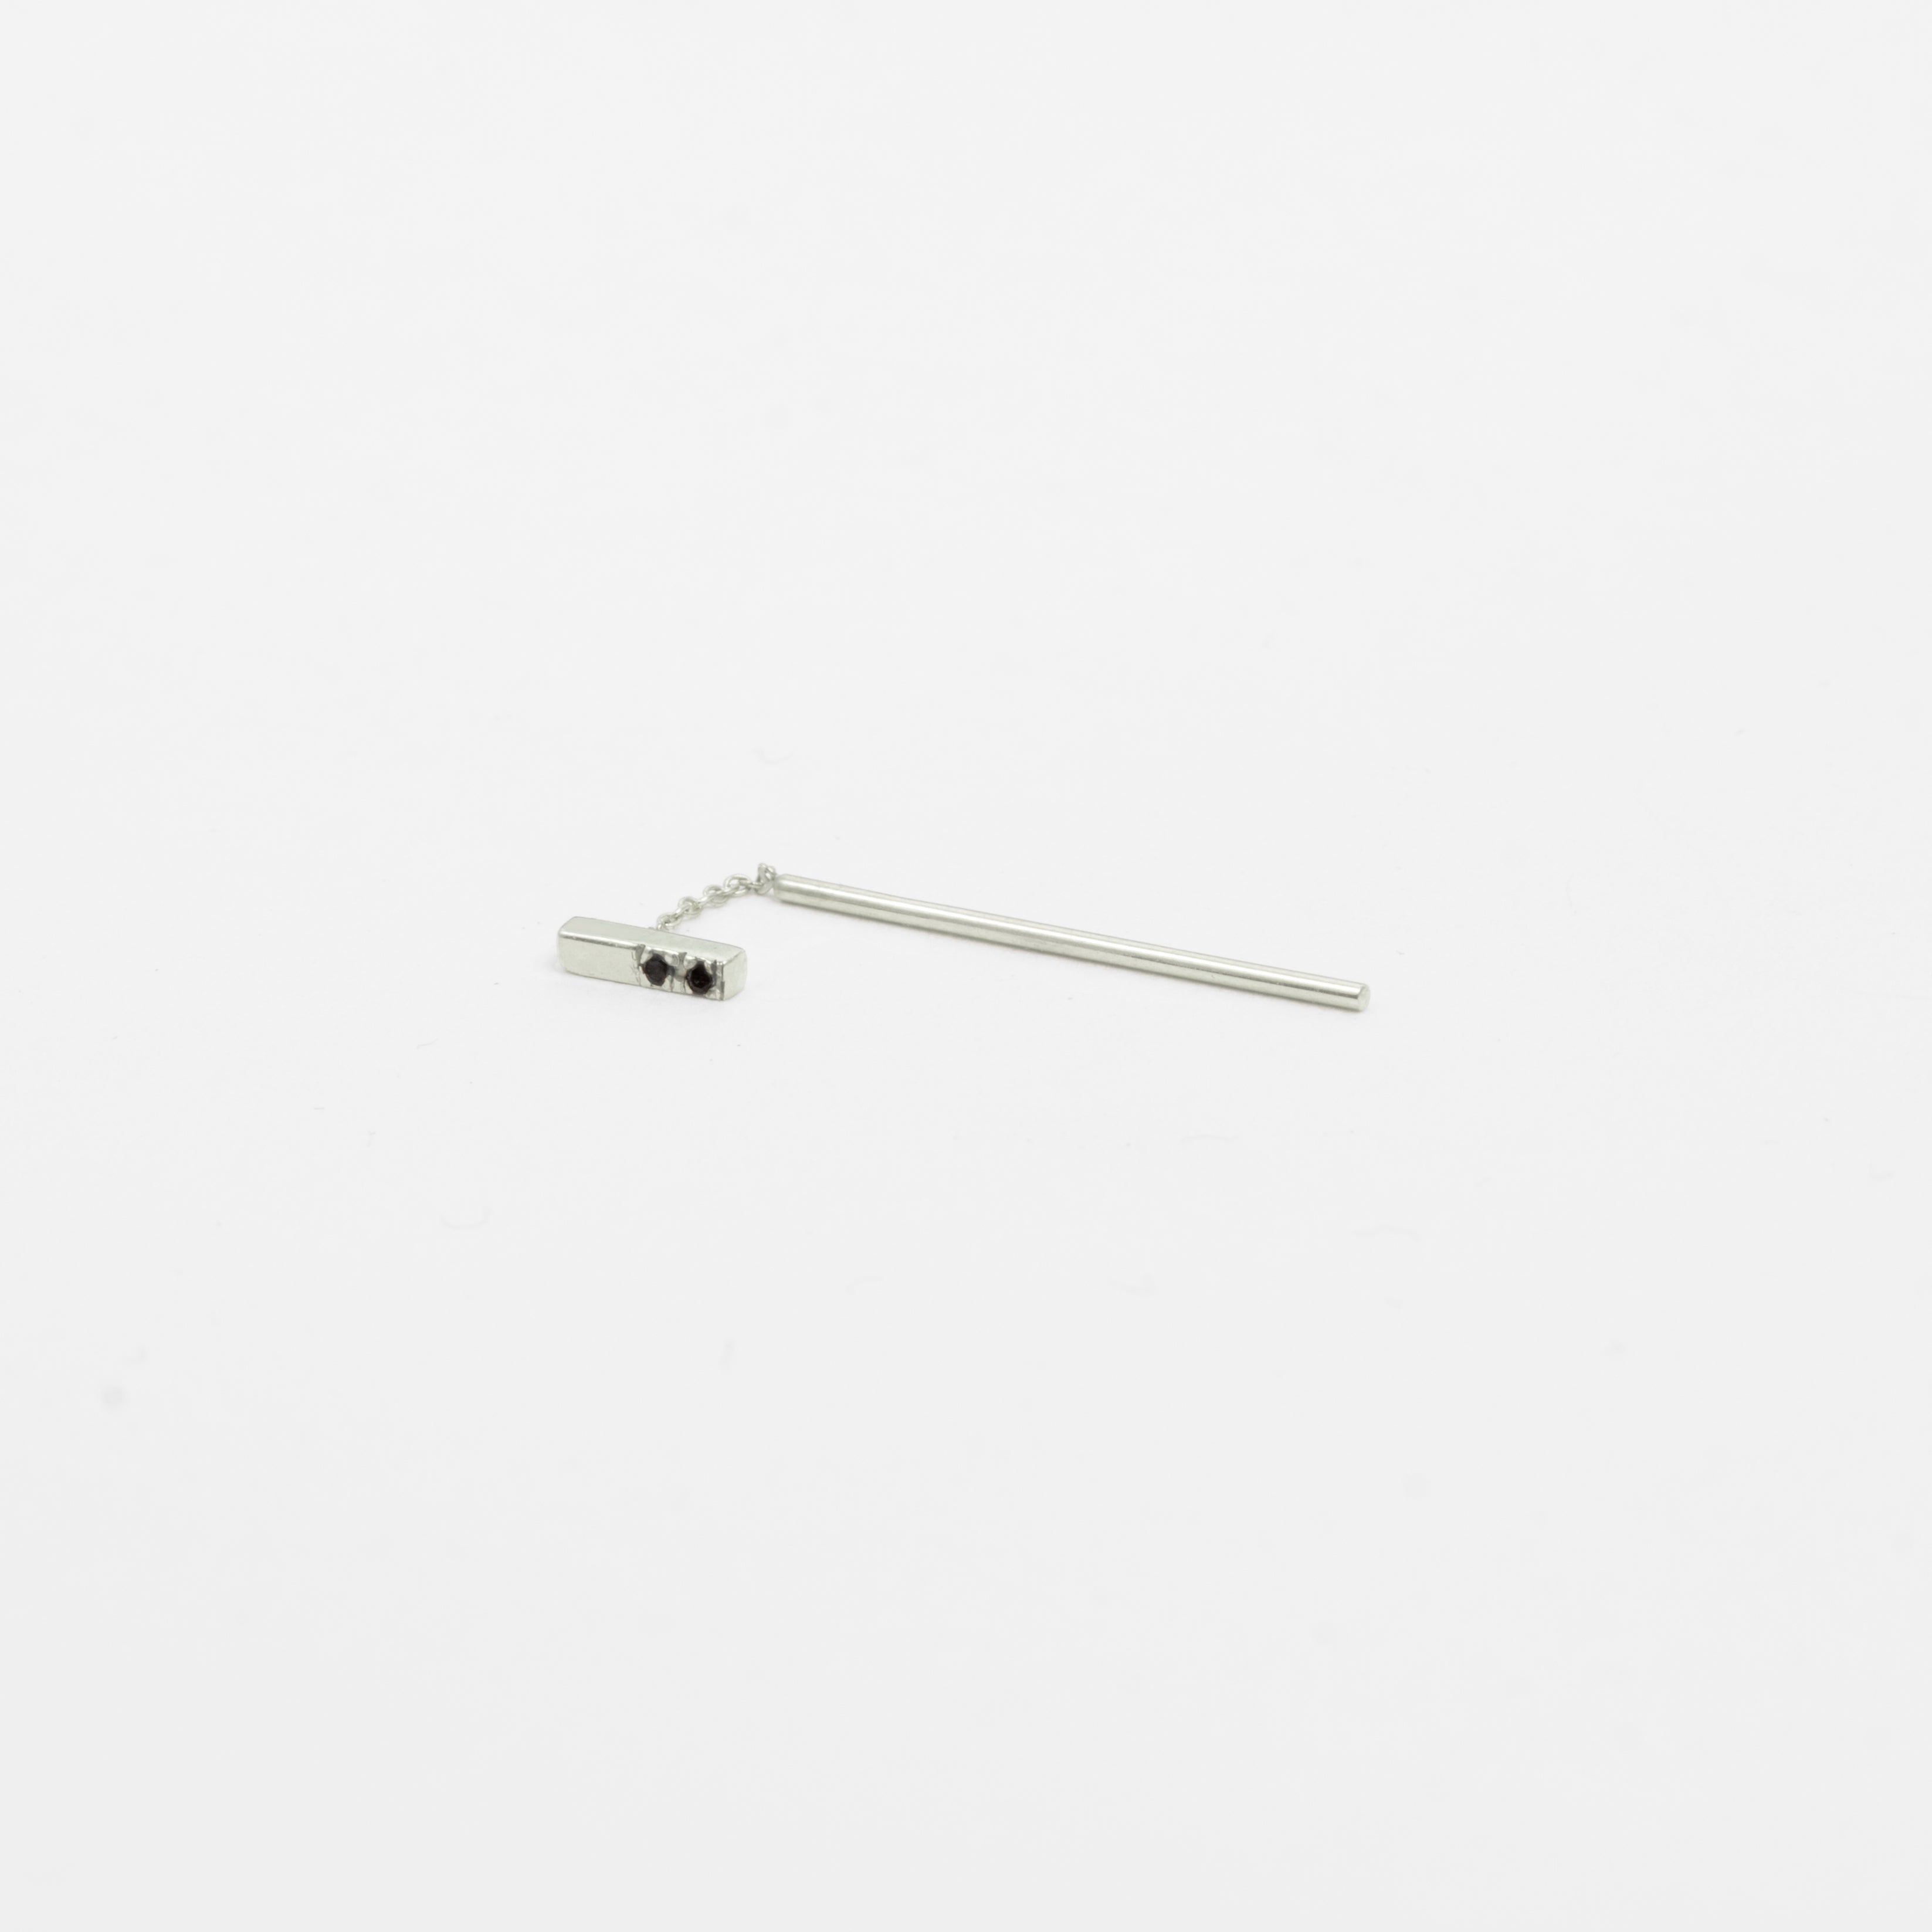 Olko Short Thin Pull Through Earring in 14k White Gold set with Black Diamonds By SHW Fine Jewelry New York City